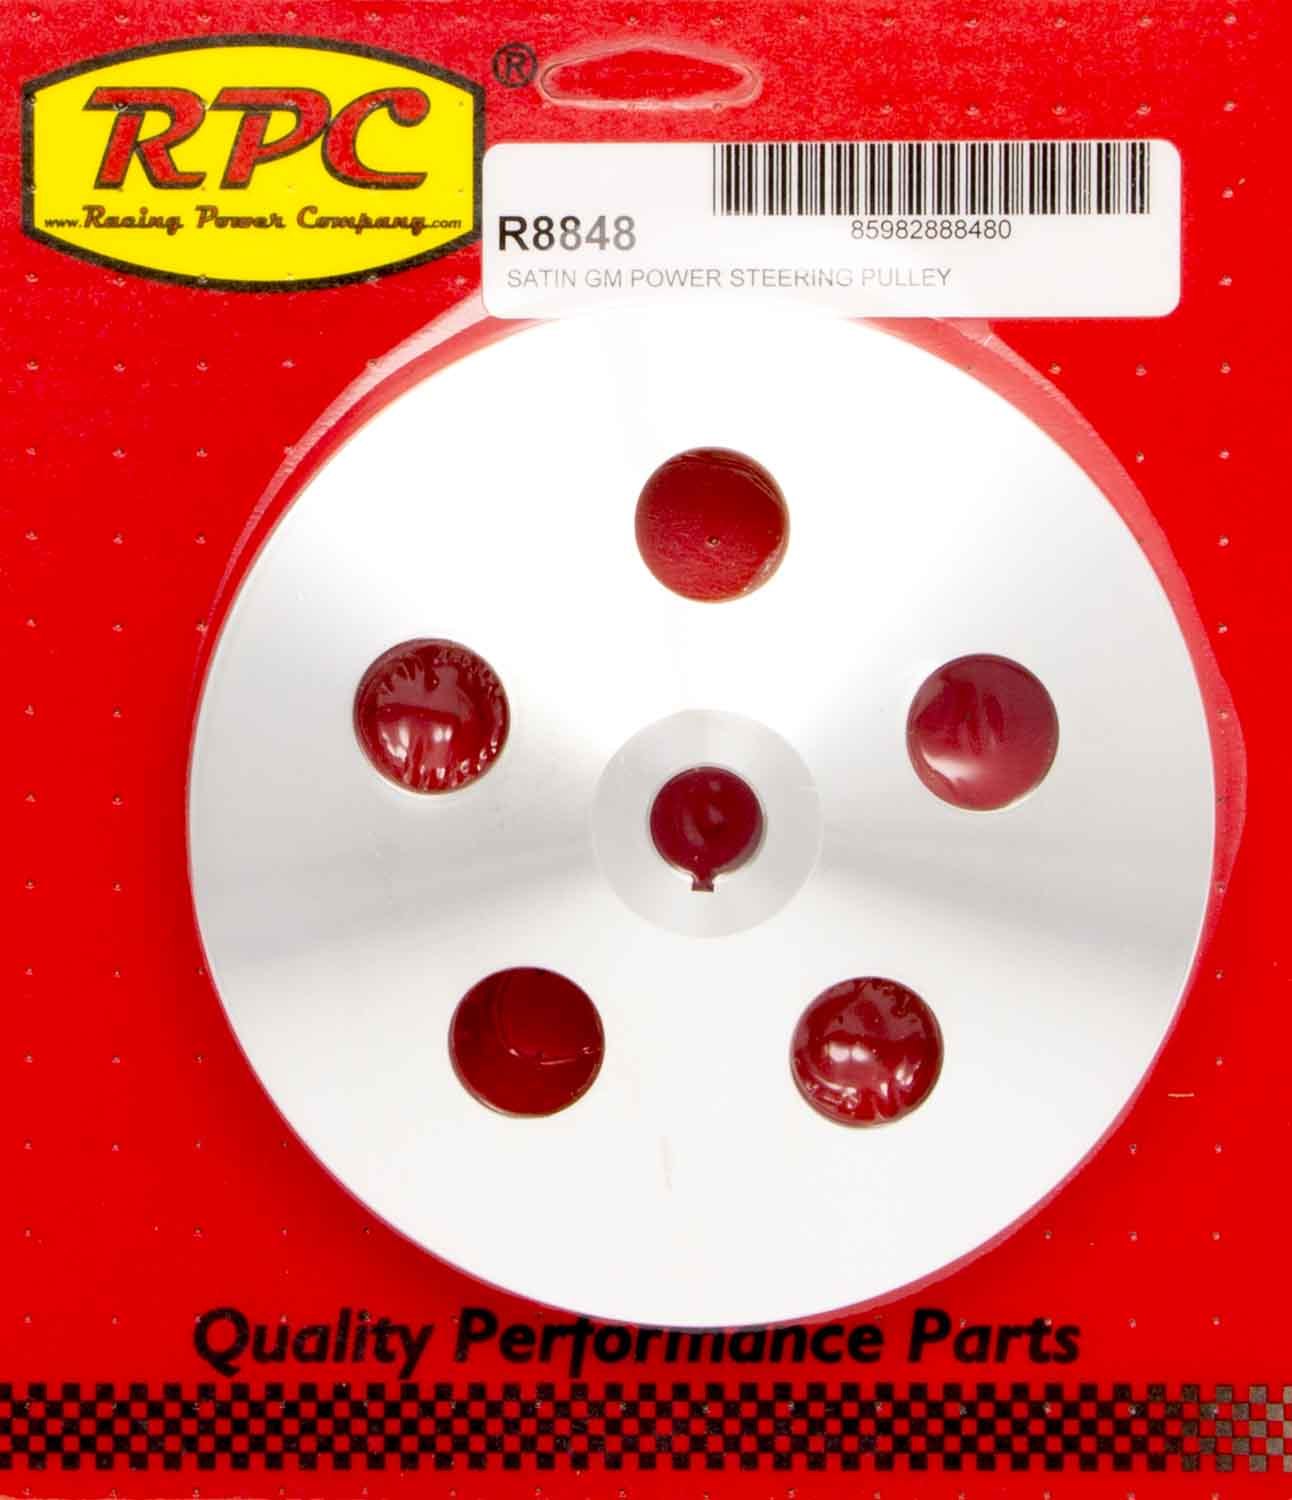 Racing Power Company R8848 Power Steering Pulley, V-Belt, 1 Groove, Bolt-On, 5.875 in Diameter, Aluminum, Satin, Saginaw, Each